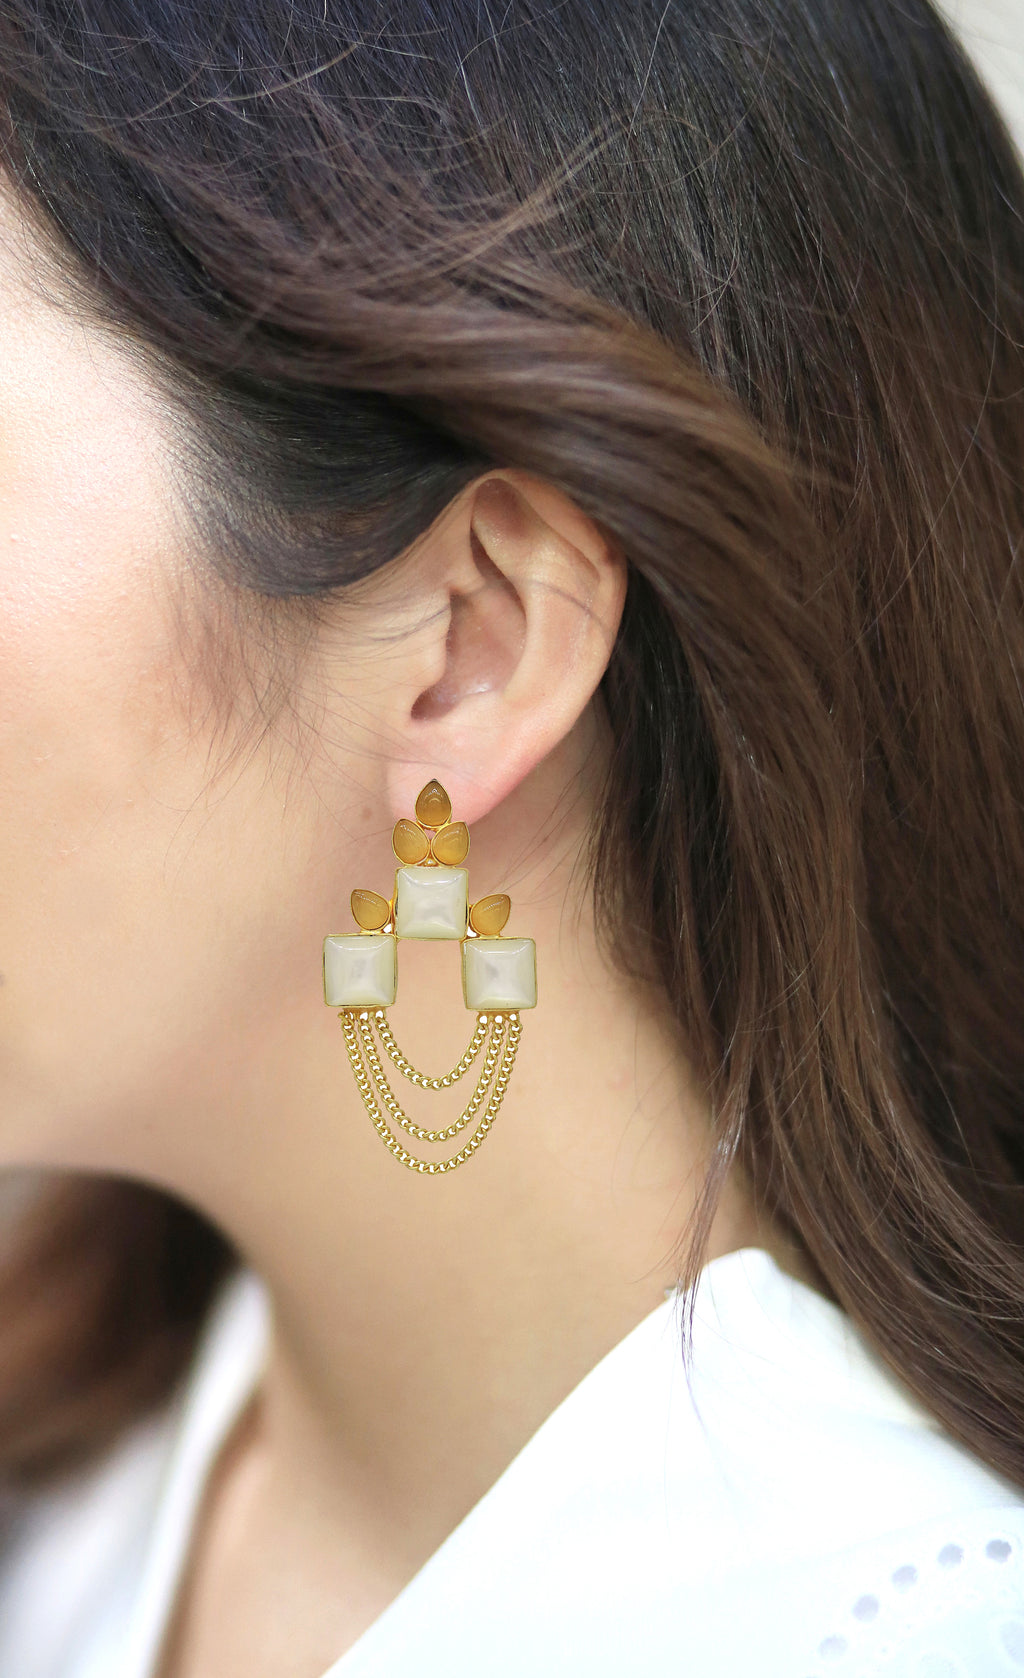 Shell Layered Earrings - Statement Earrings - Gold-Plated & Hypoallergenic - Made in India - Dubai Jewellery - Dori